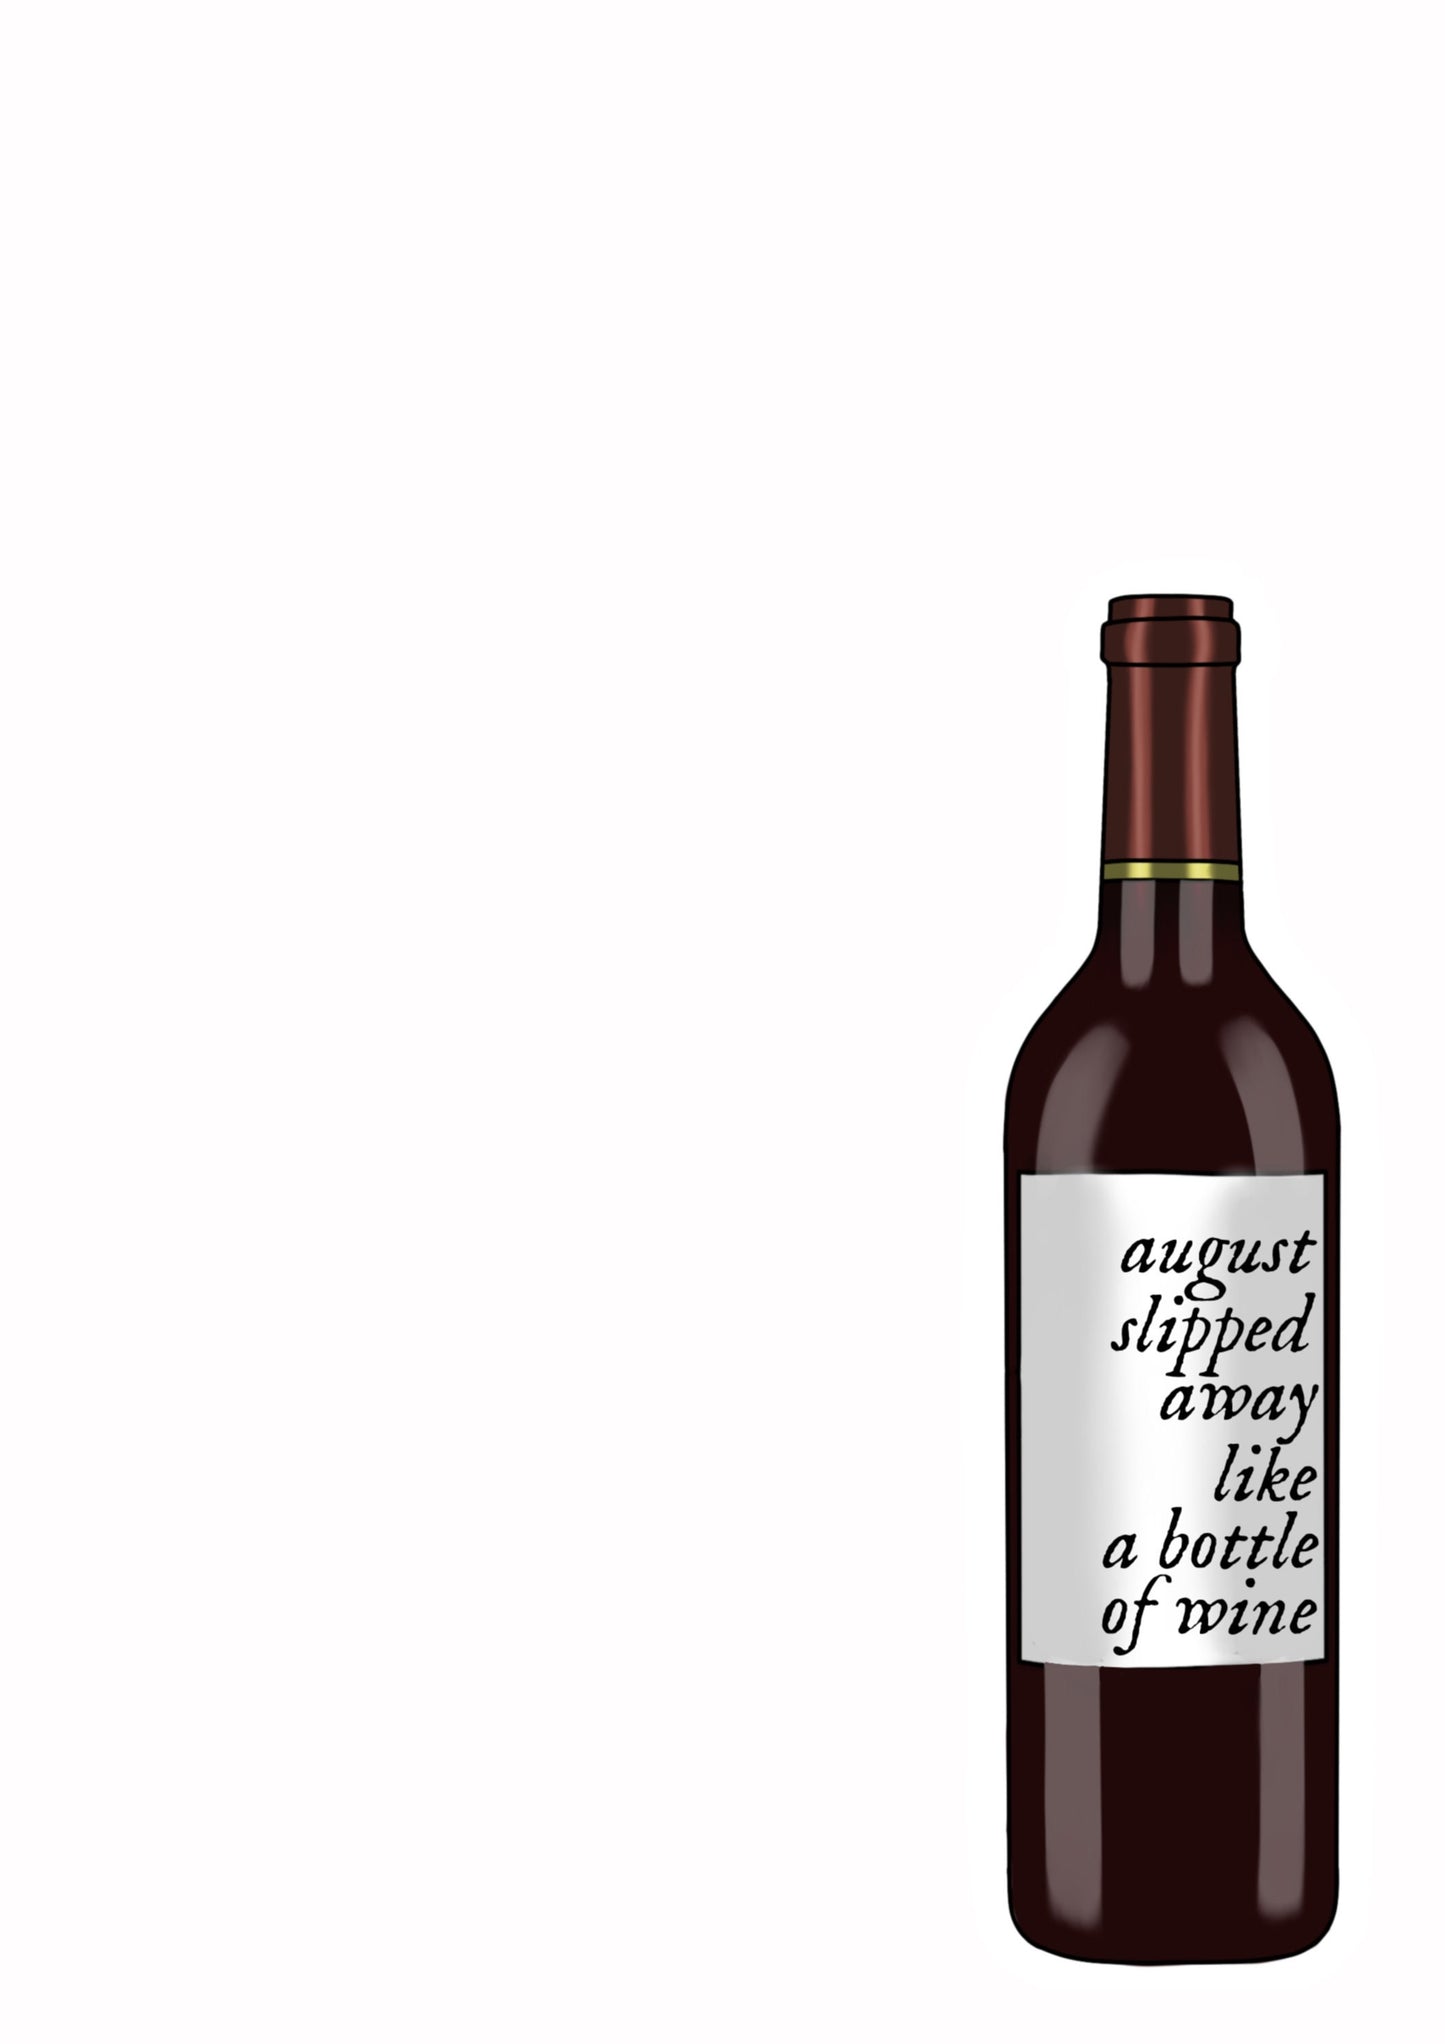 August Slipped Away Like a Bottle of Wine Print | Taylor Swift Print | Folklore